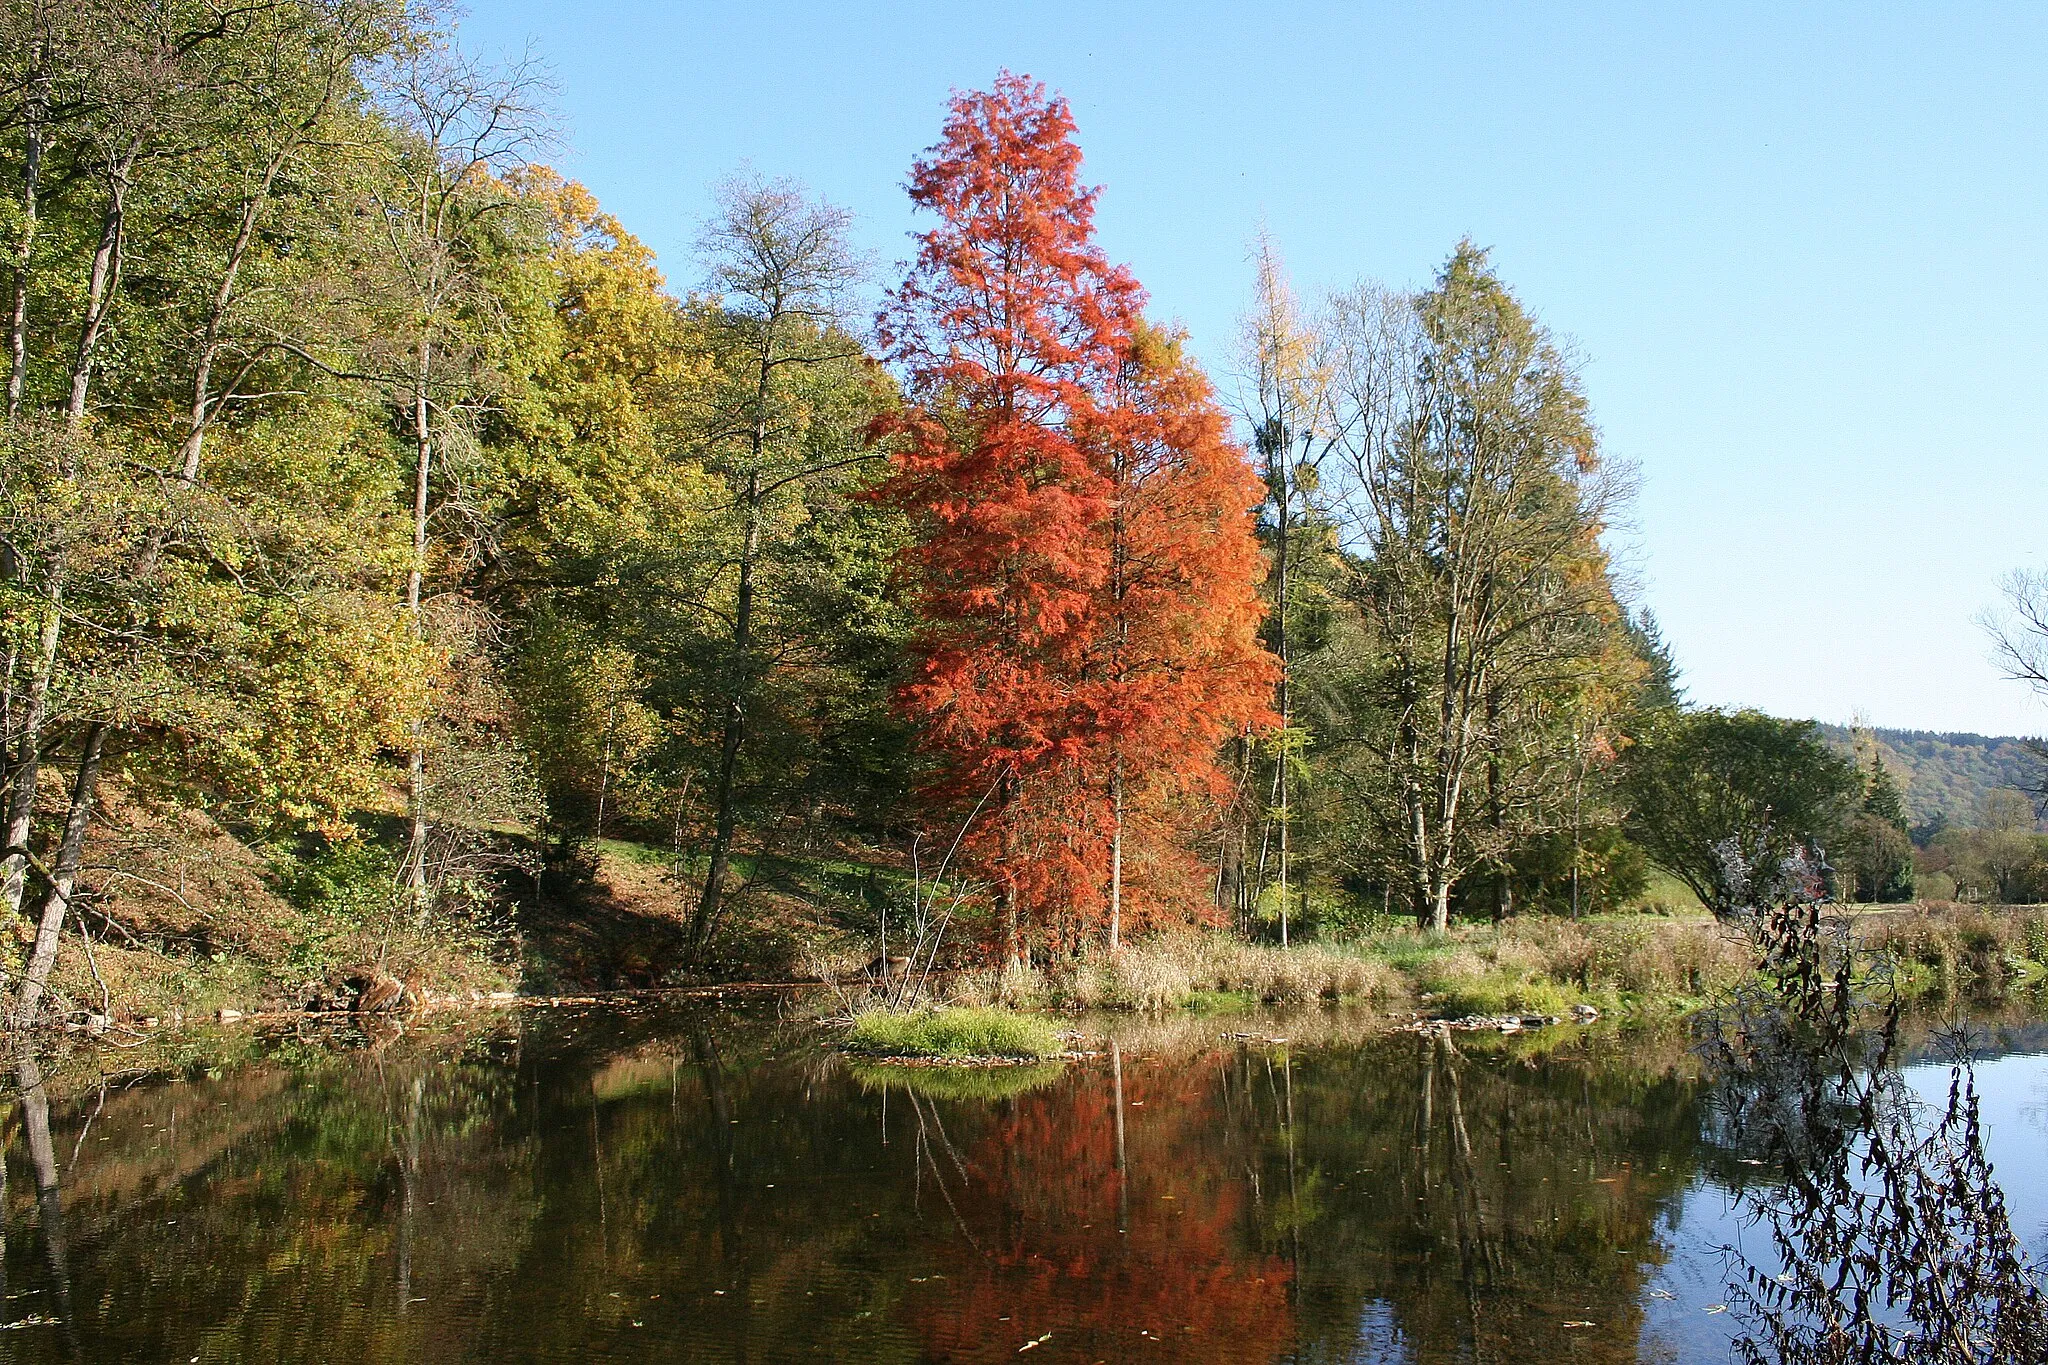 Photo showing: Rendeux (Belgium), the Ourthe river and the Taxodium distichum (Taxodium distichum) of the Arboretum Robert Lenoir in the autumn.